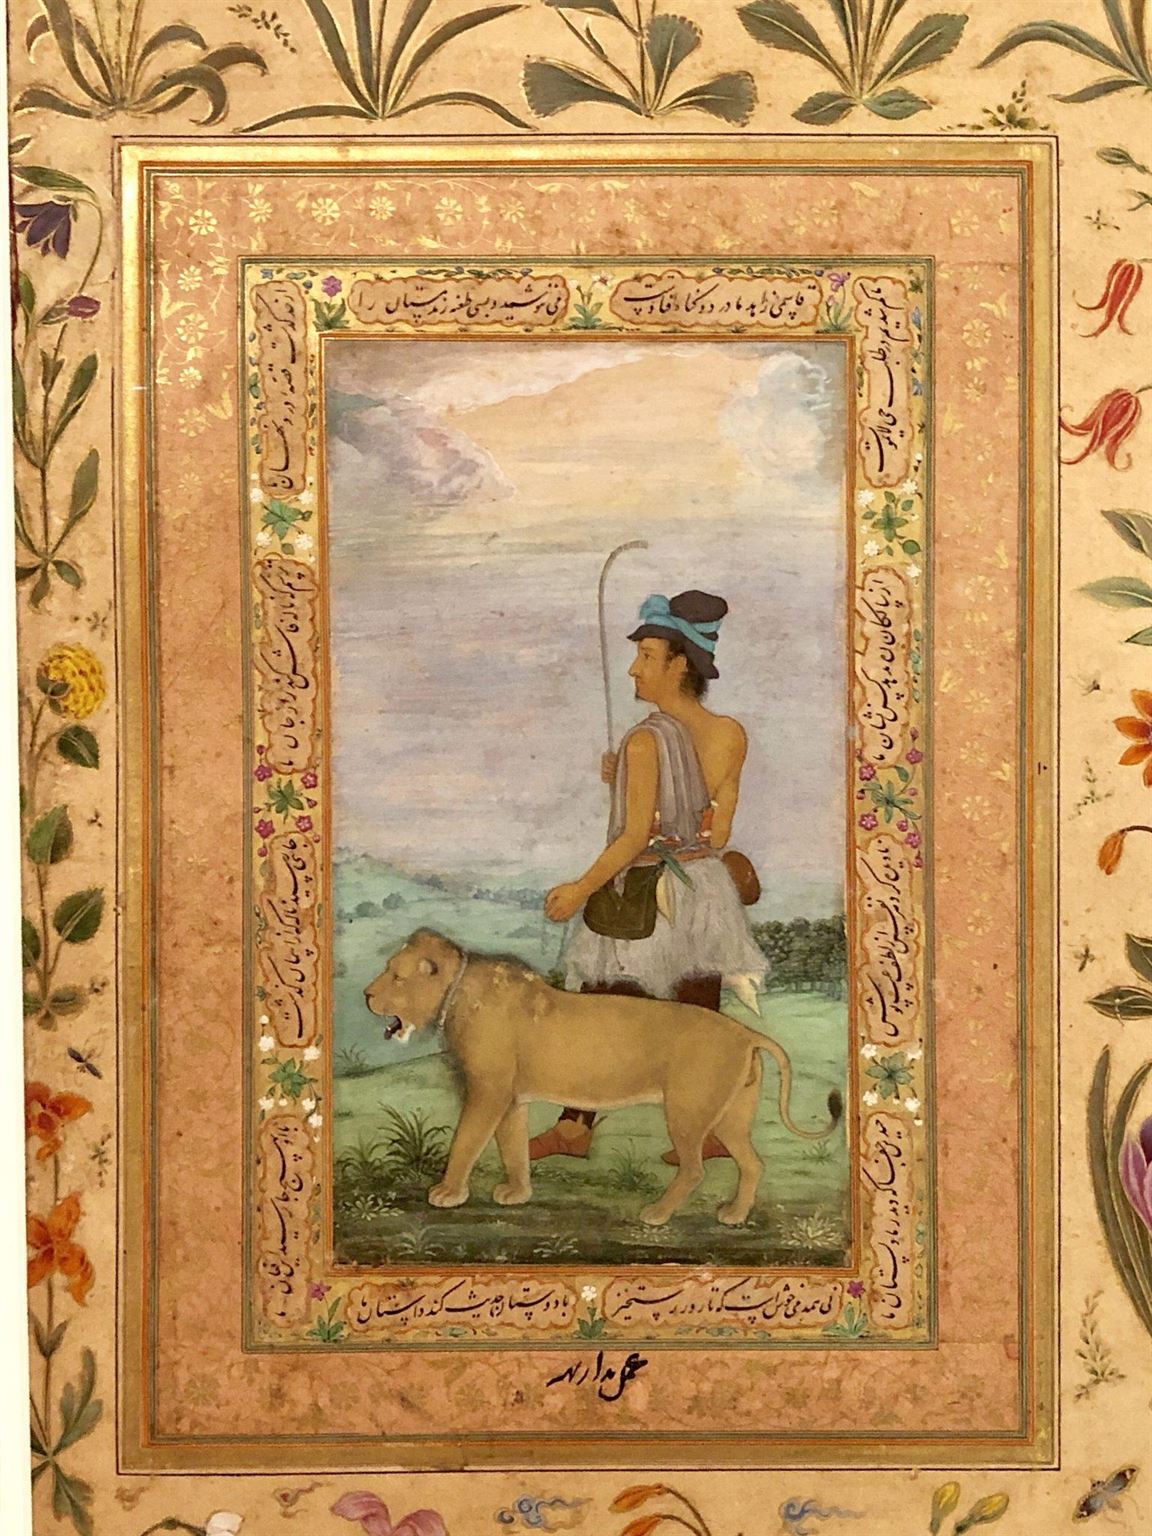 Dervish With a Lion”, Folio from the Shah Jahan Album, Artist ...